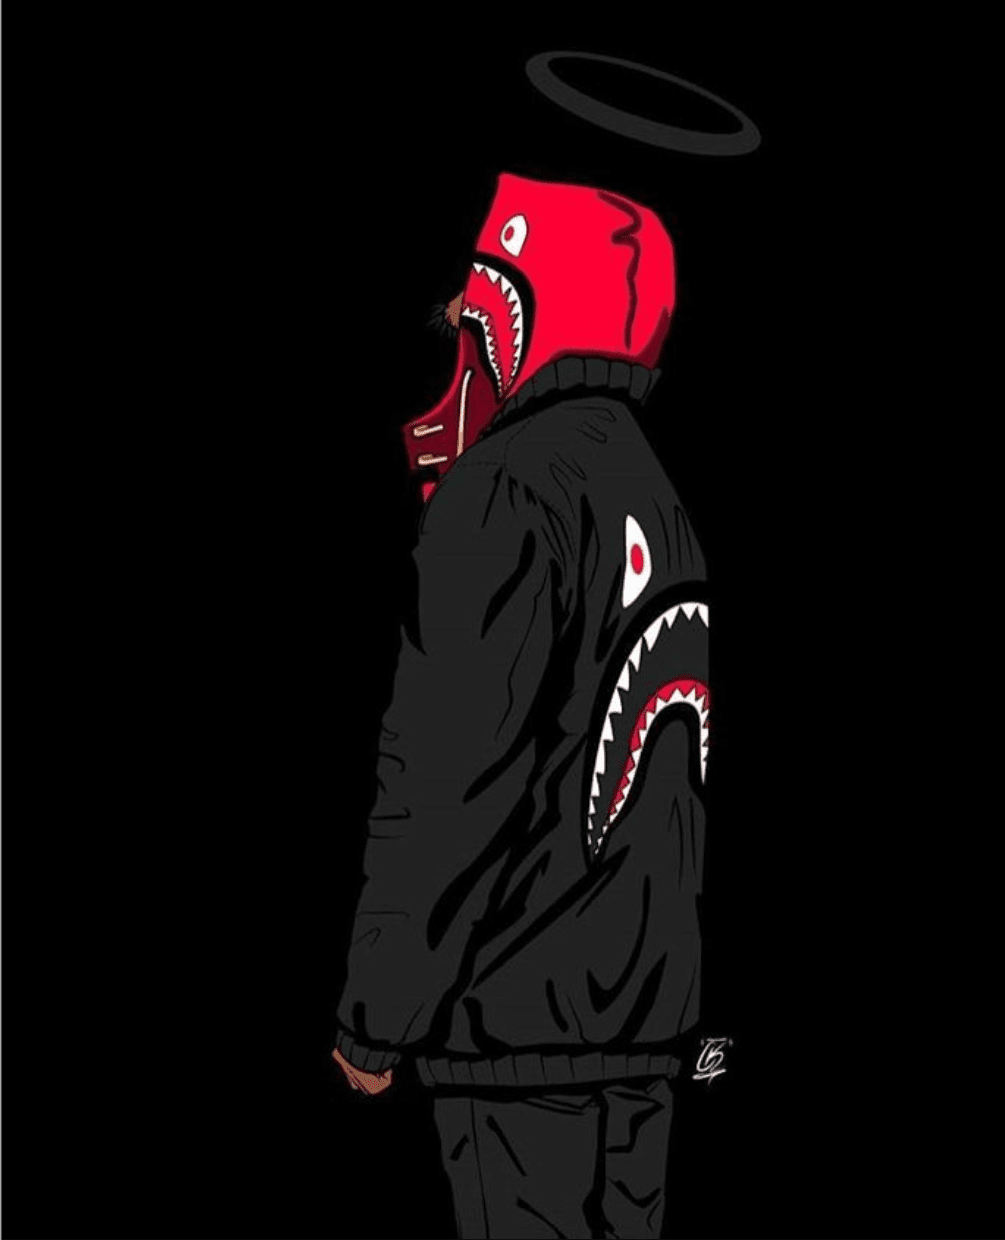 Download Bape Wallpaper - Android, iOS & PC